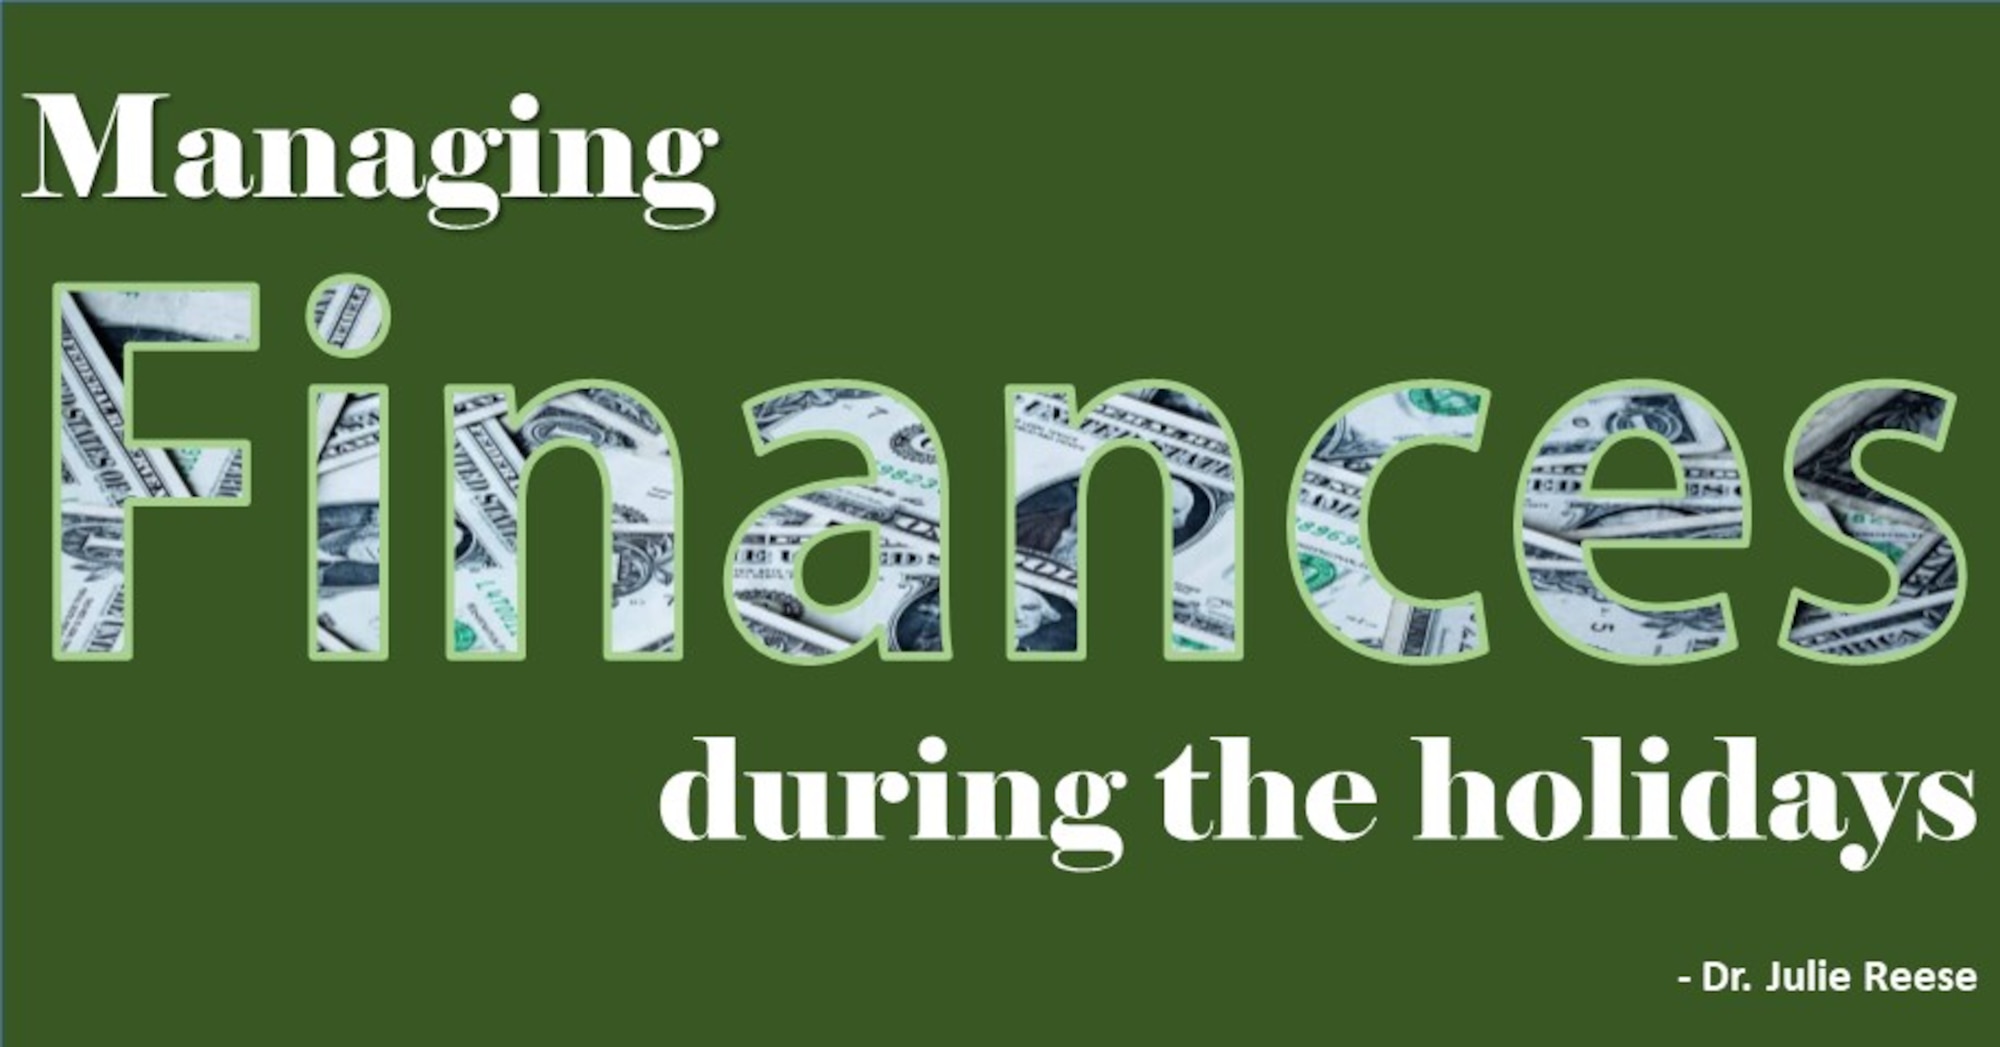 Managing finances during the holidays